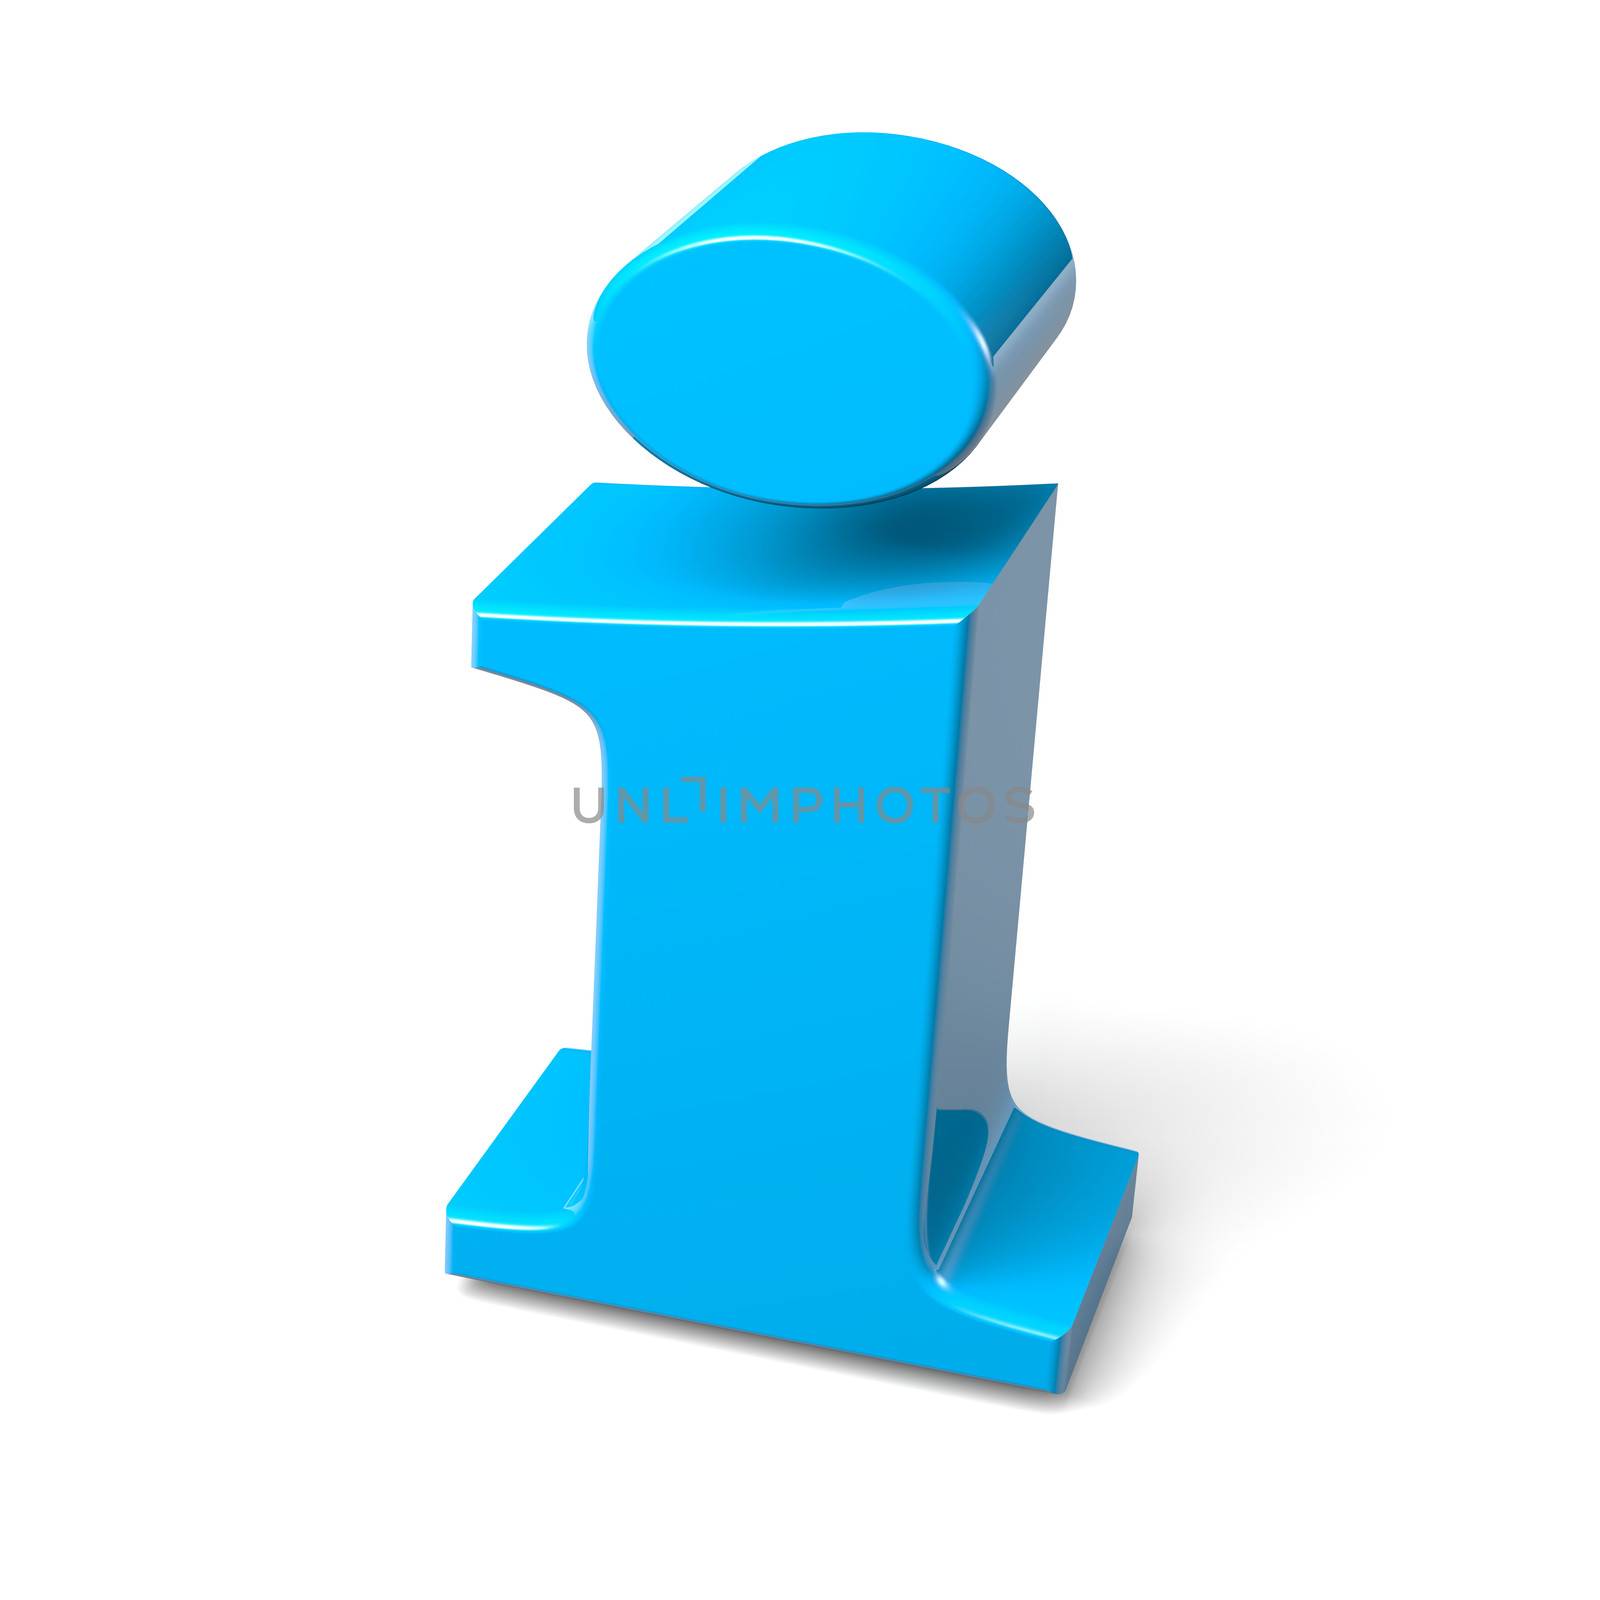 I Info Blue Letter 3D Illustration with Shadow on White Background